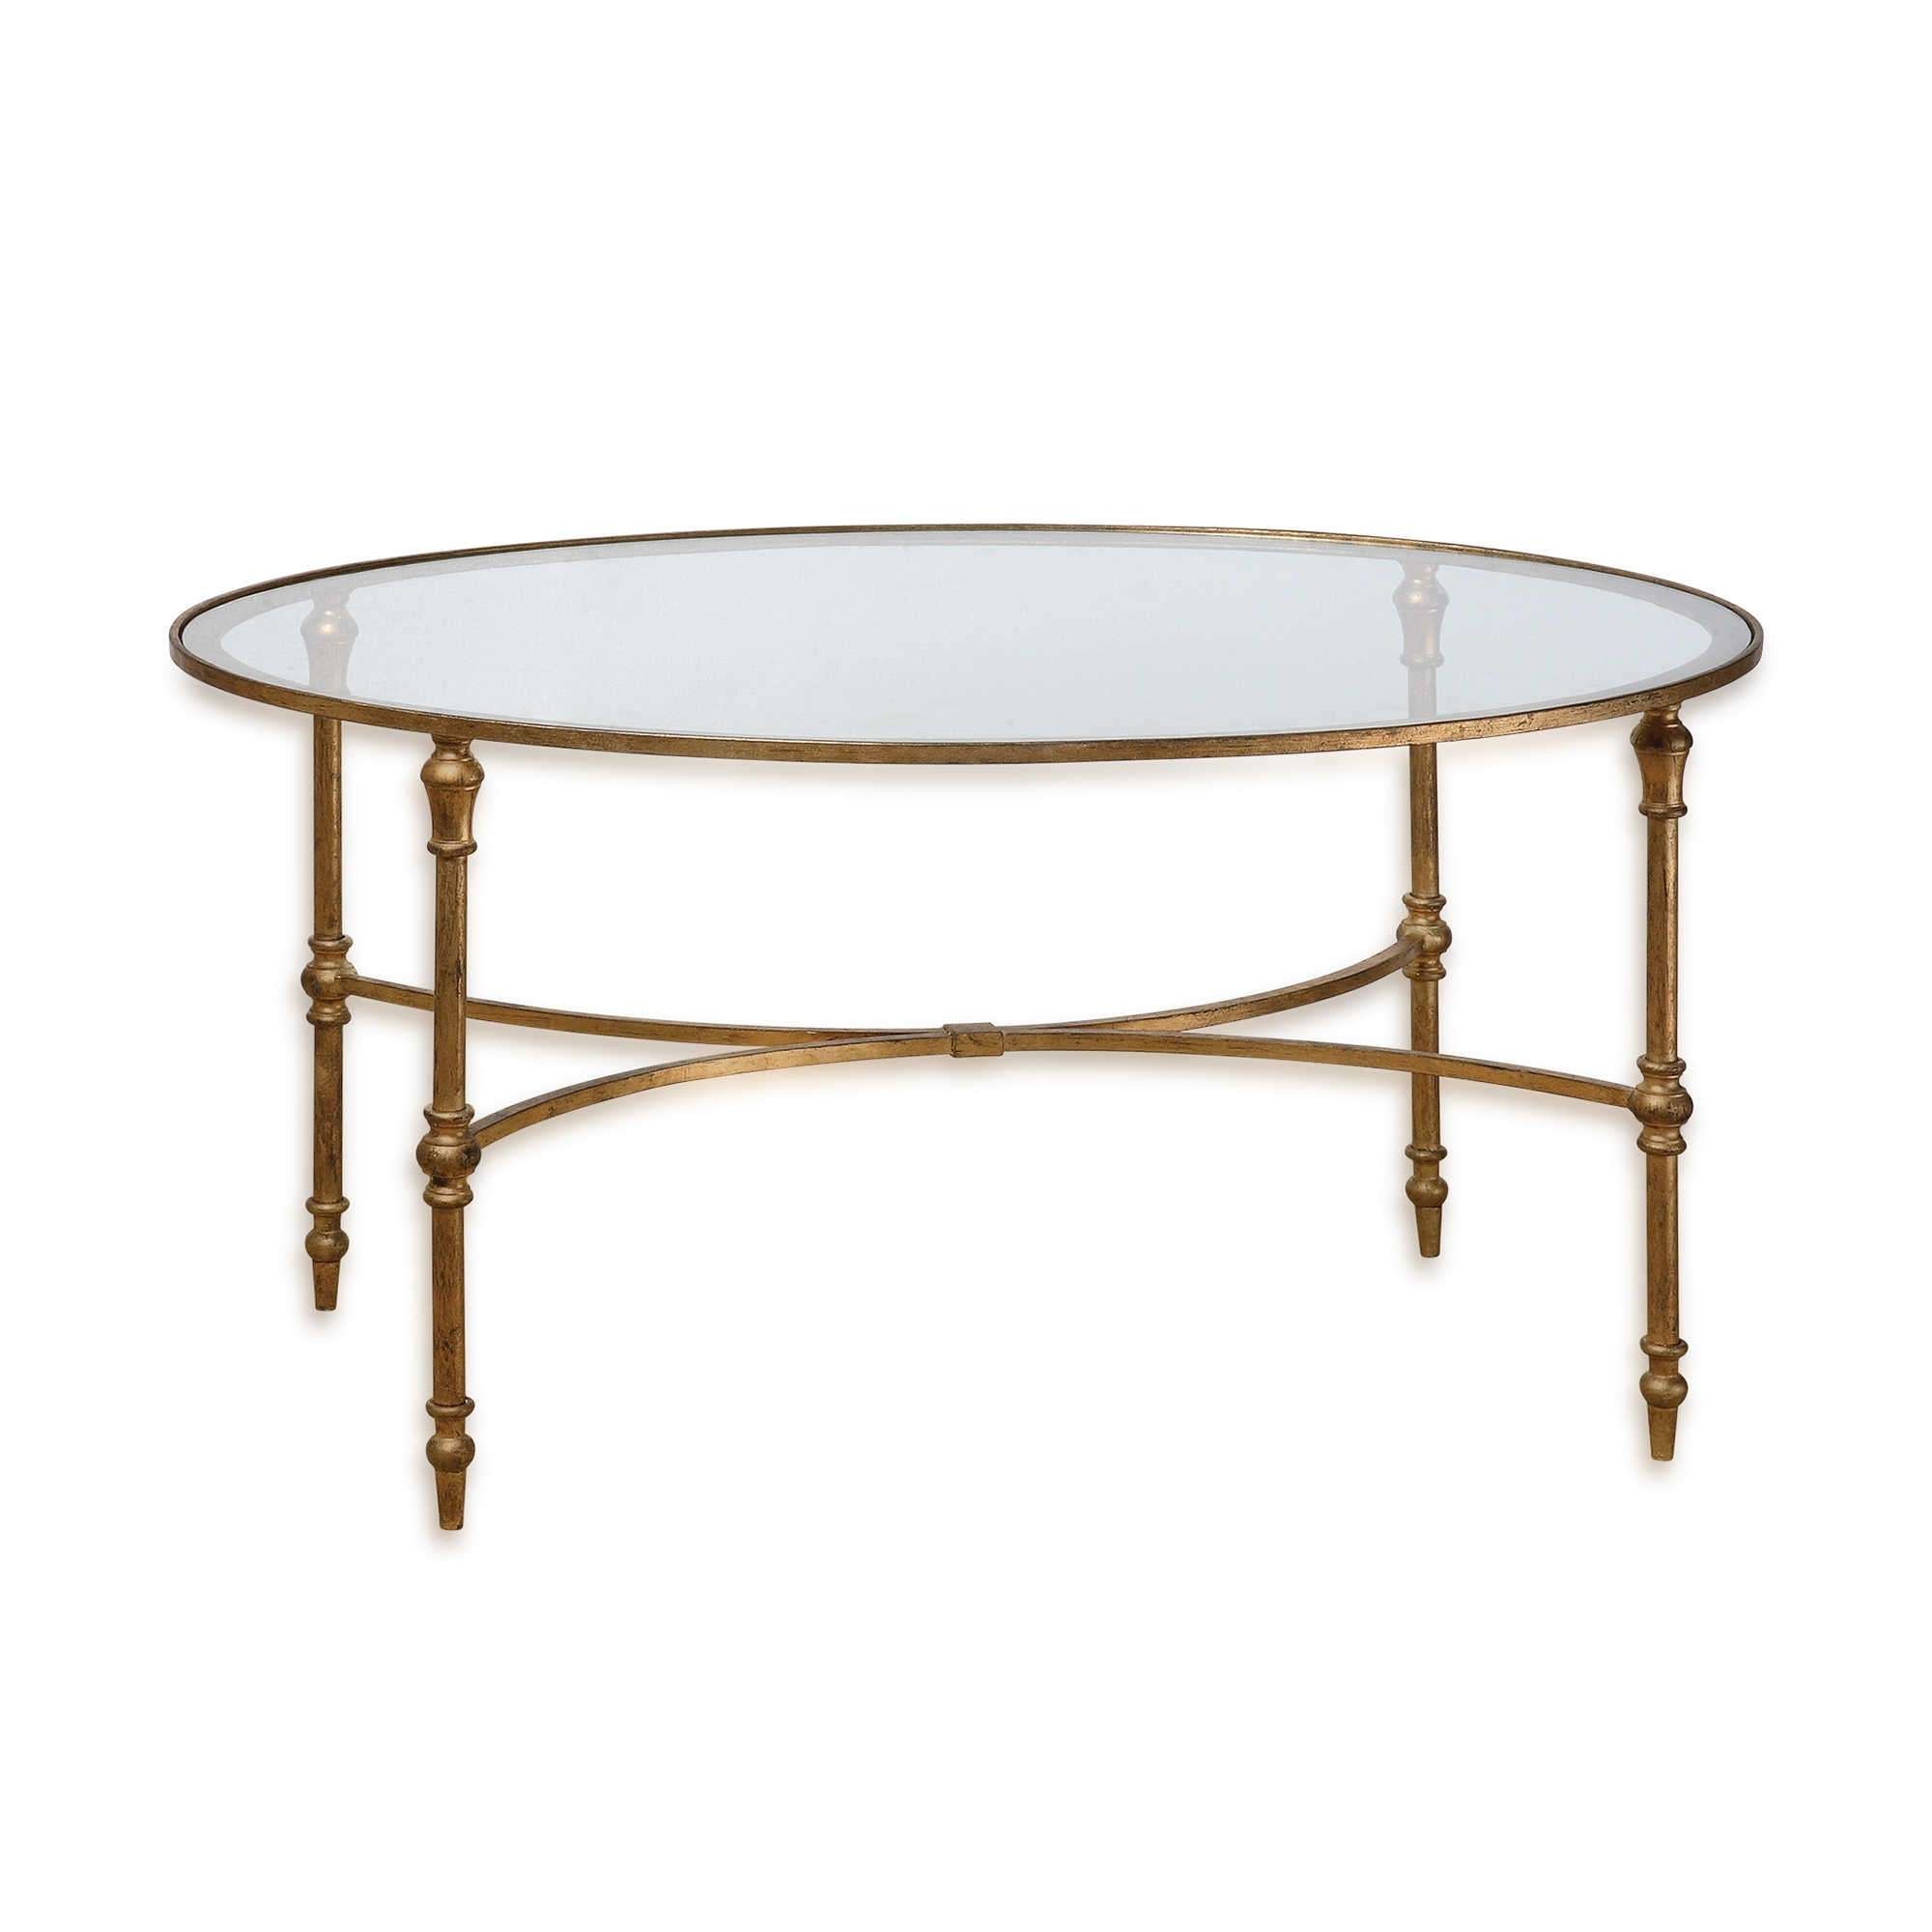 Coffee Tables : Top Of Black Oval Coffee Tables Small Glass In Current Oval Glass Coffee Tables (View 14 of 20)